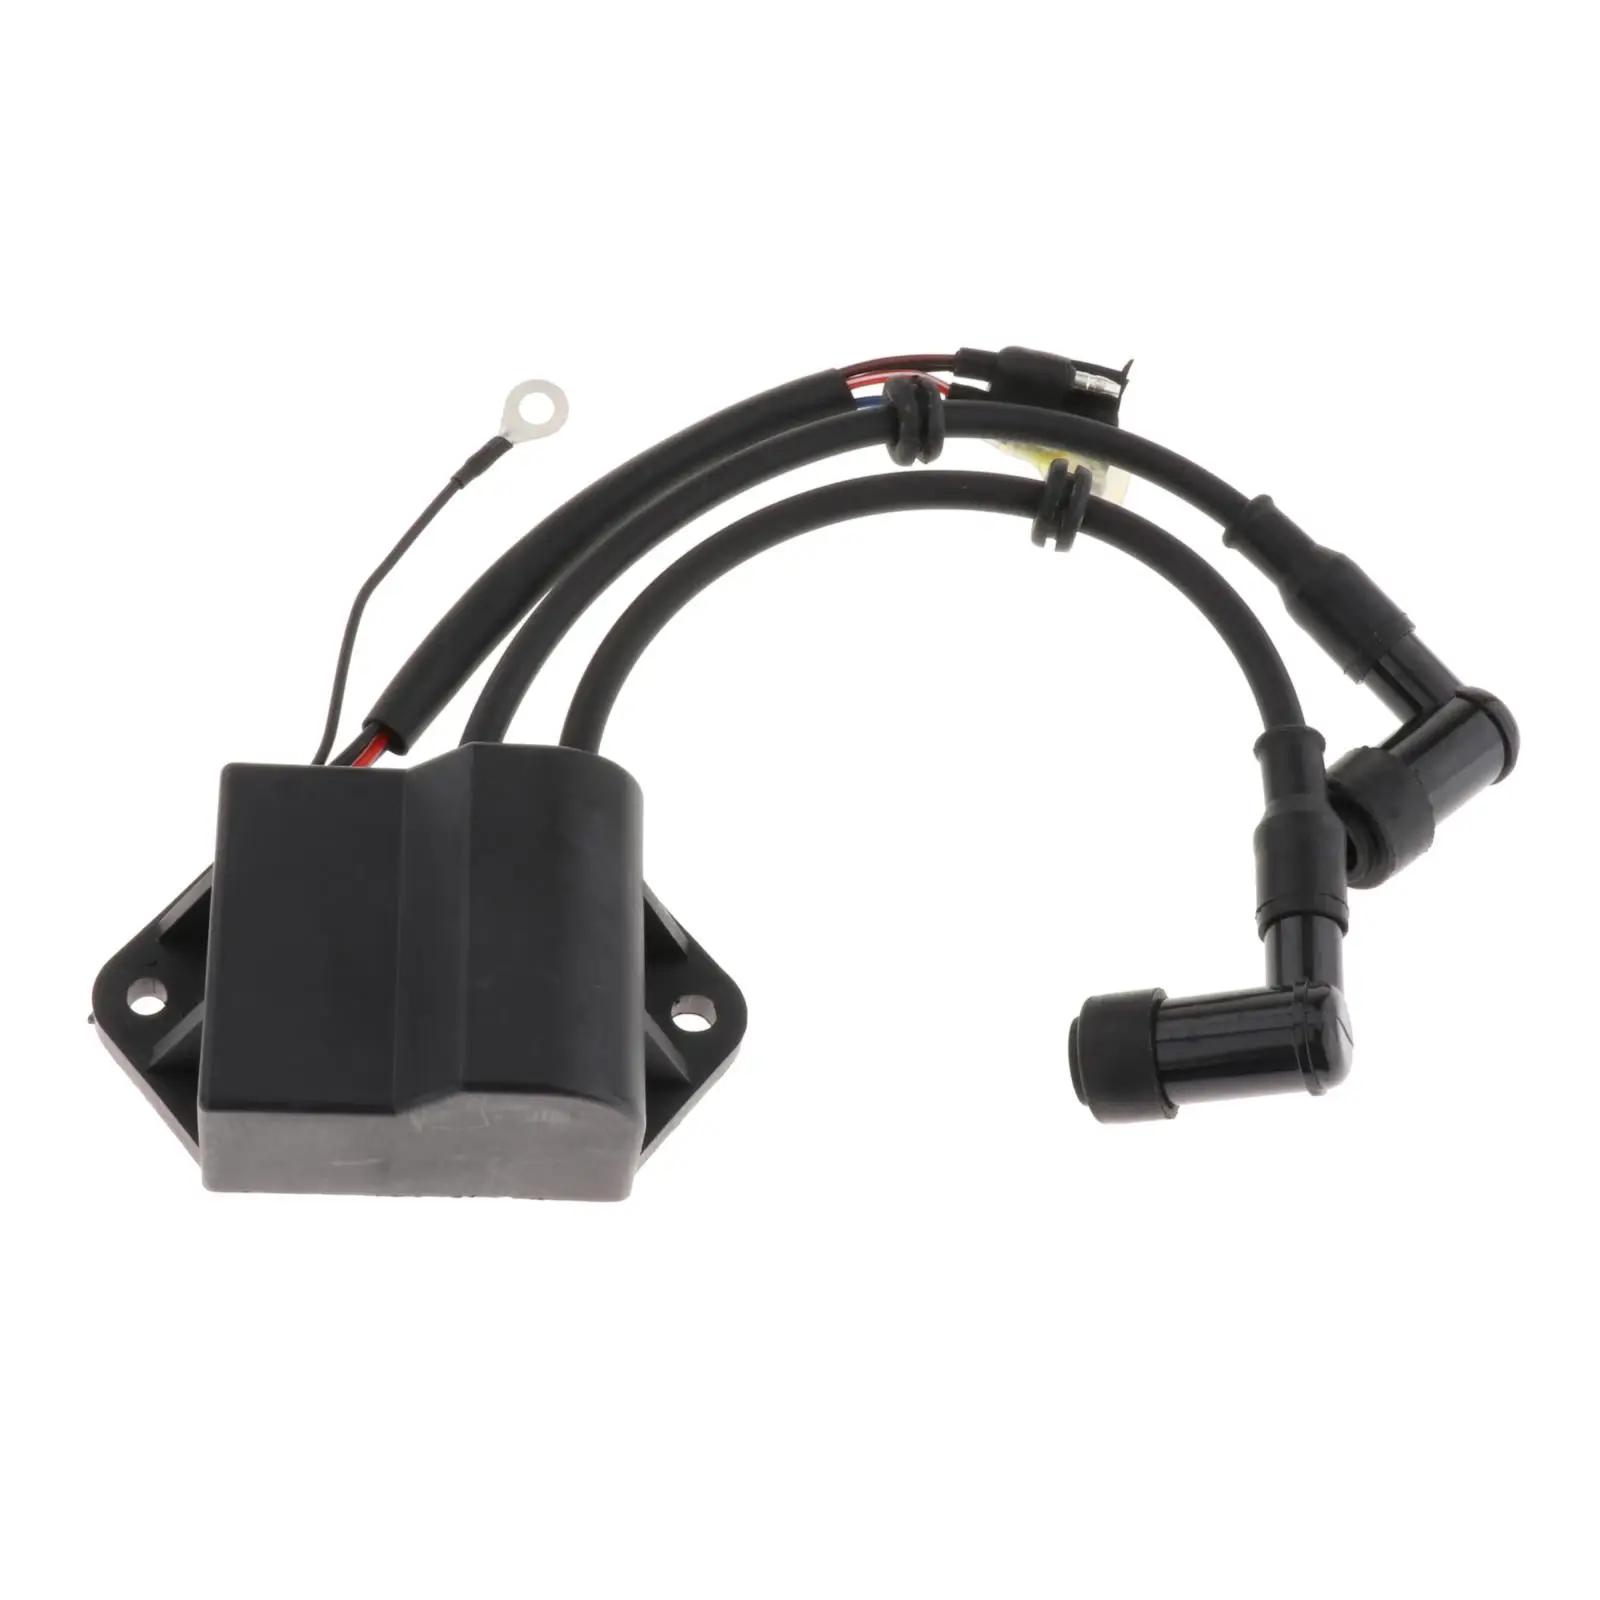 Electric Motor CDI Unit CDI Coil Assy Fit for Suzuki Outboard 2 Stroke Engine Motor DT6 32900-98101 Replace Accessories